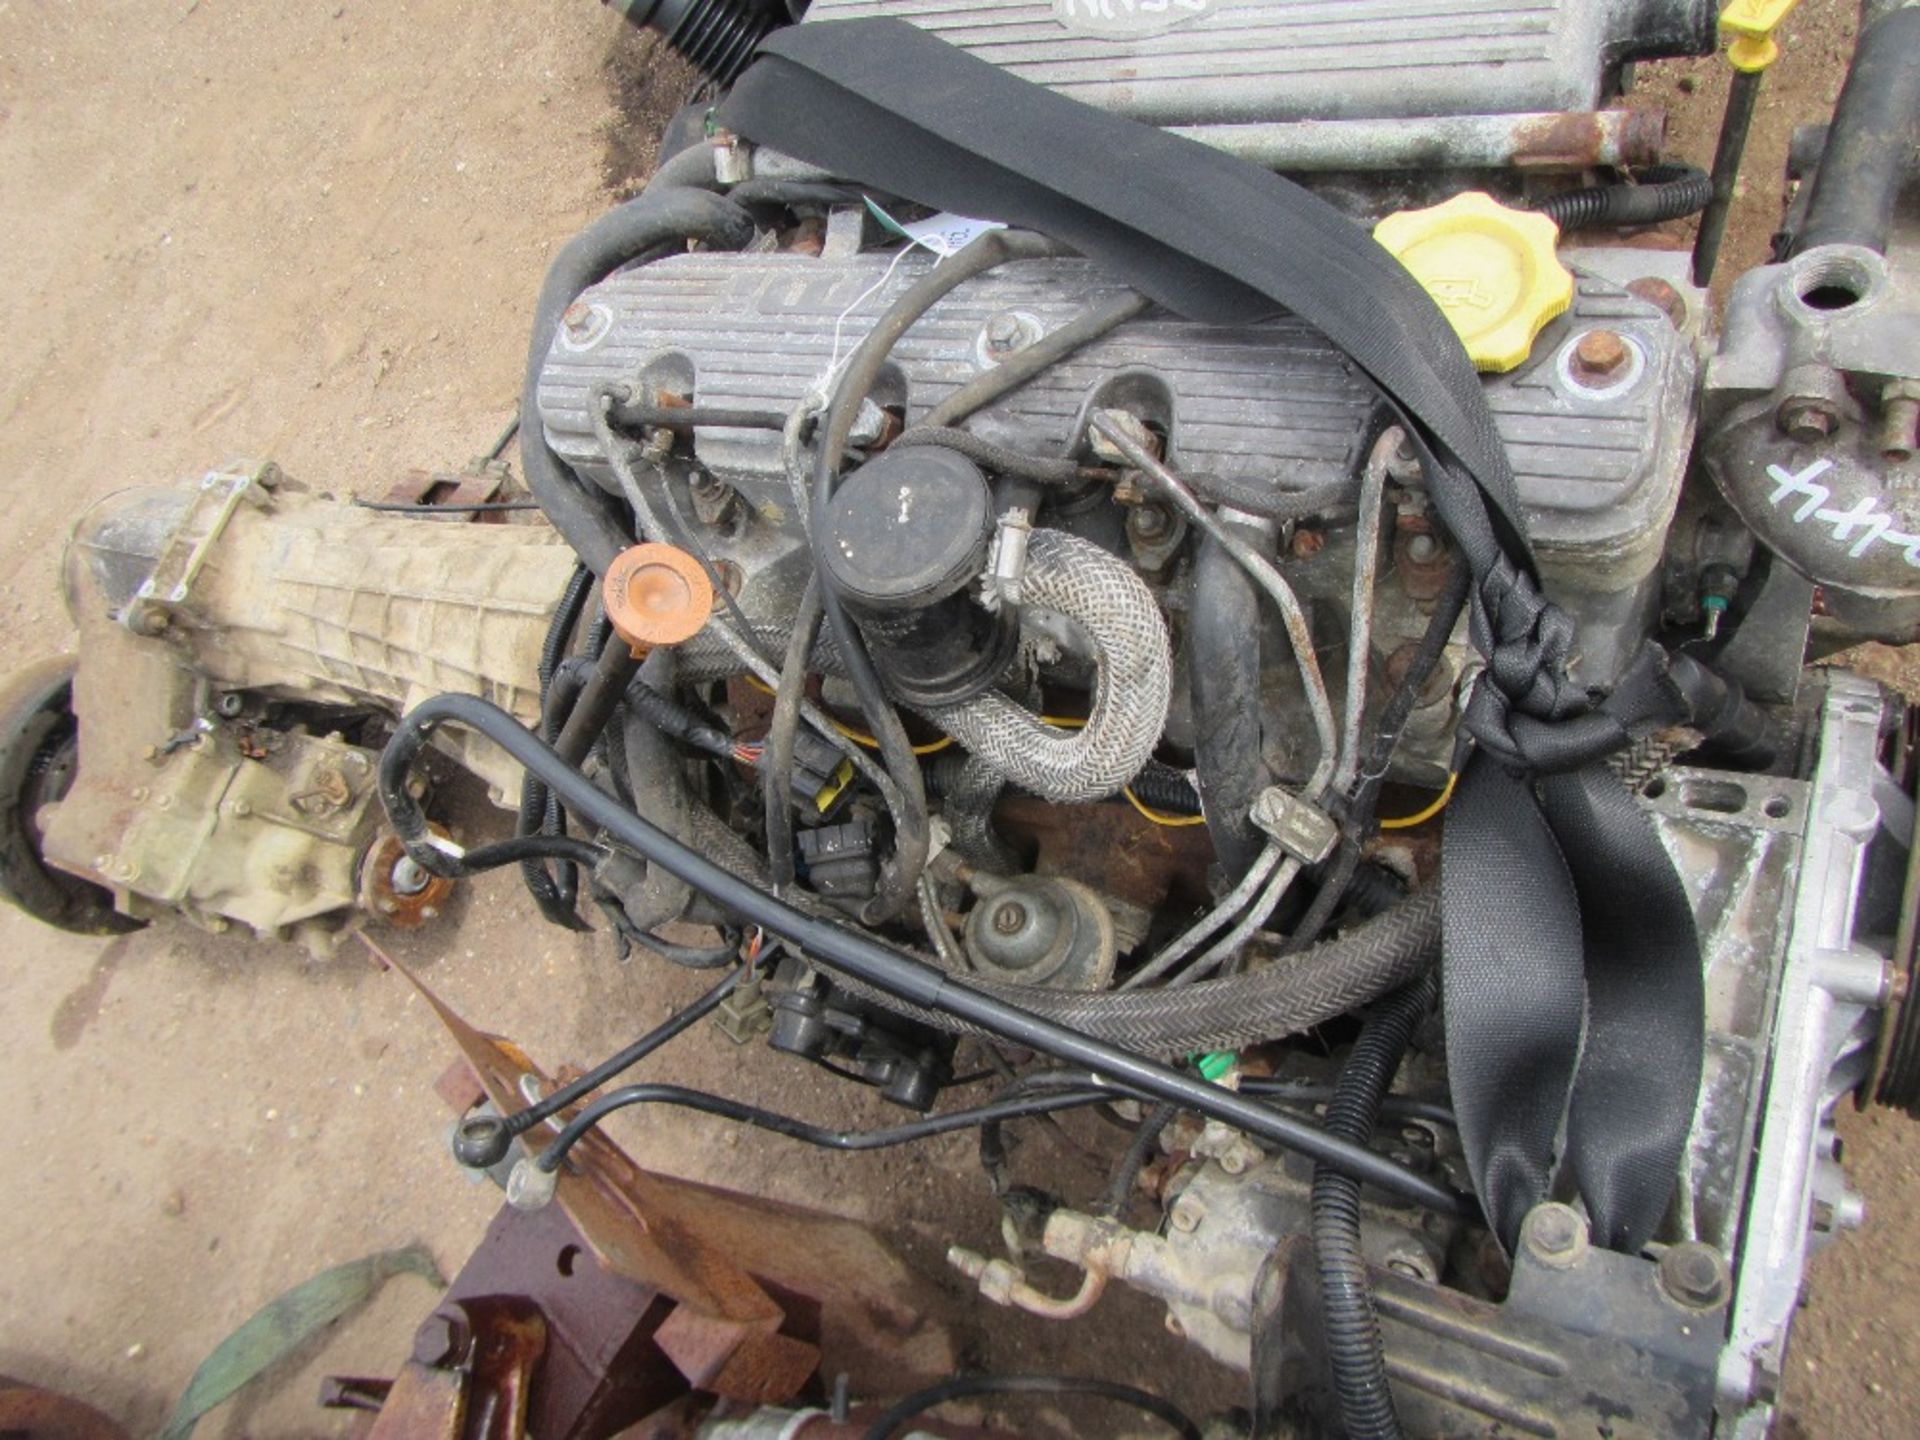 Land Rover Discovery 300 TDI Engine & Gearbox - Image 2 of 2